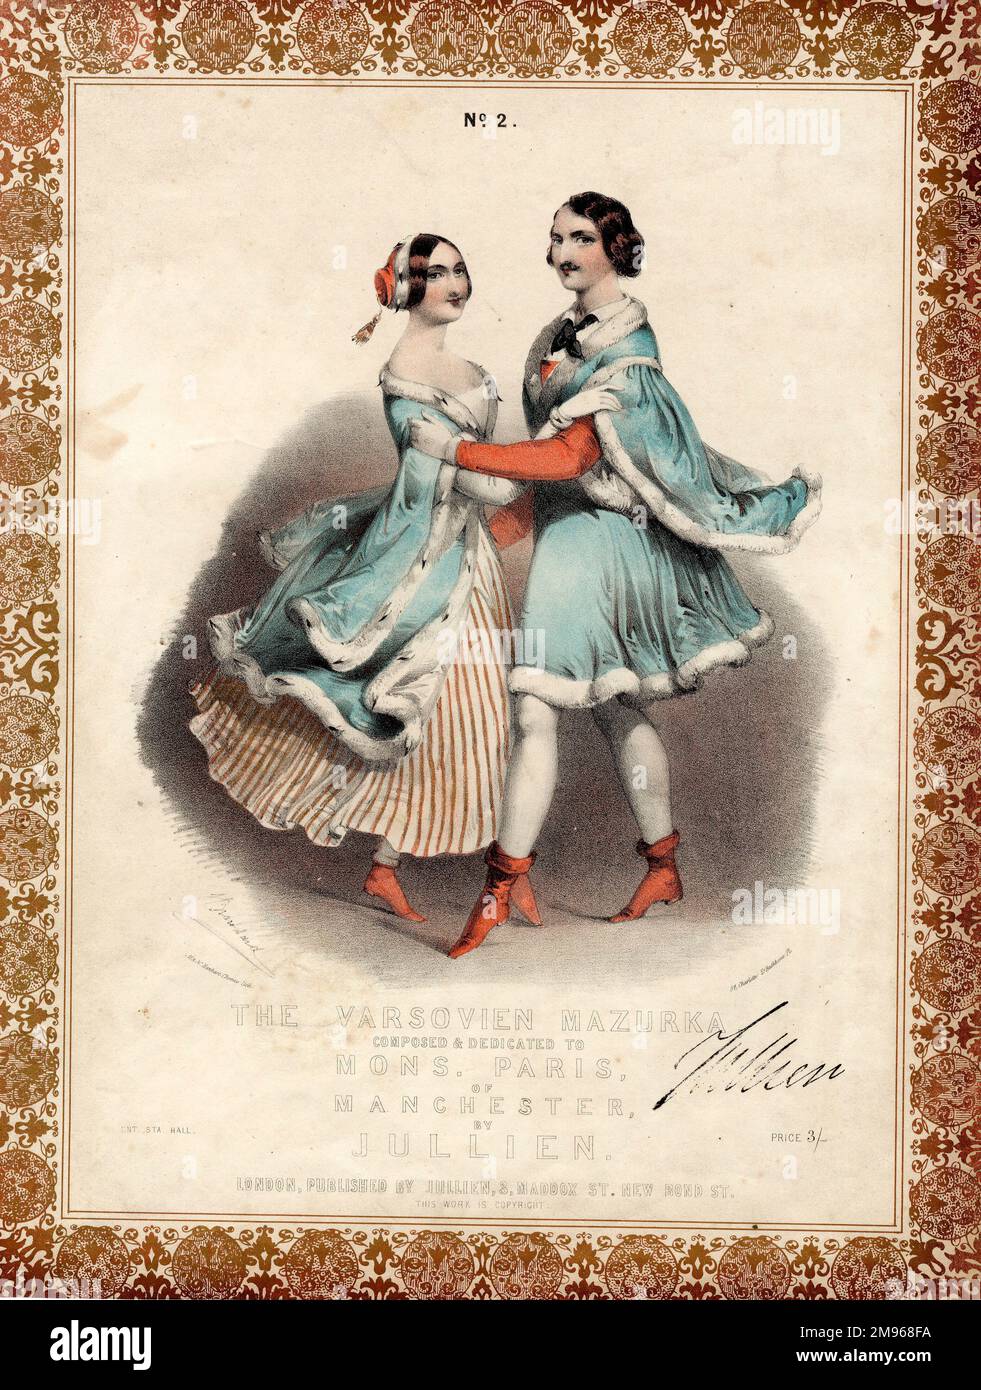 Music cover for The Varsovien (or Varsovian) Mazurka, composed by Louis Antoine Jullien (1812-1860), and dedicated to Monsieur Paris of Manchester.  A couple from Warsaw, Poland, are depicted in traditional costume dancing the mazurka, a national Polish folk dance. Stock Photo